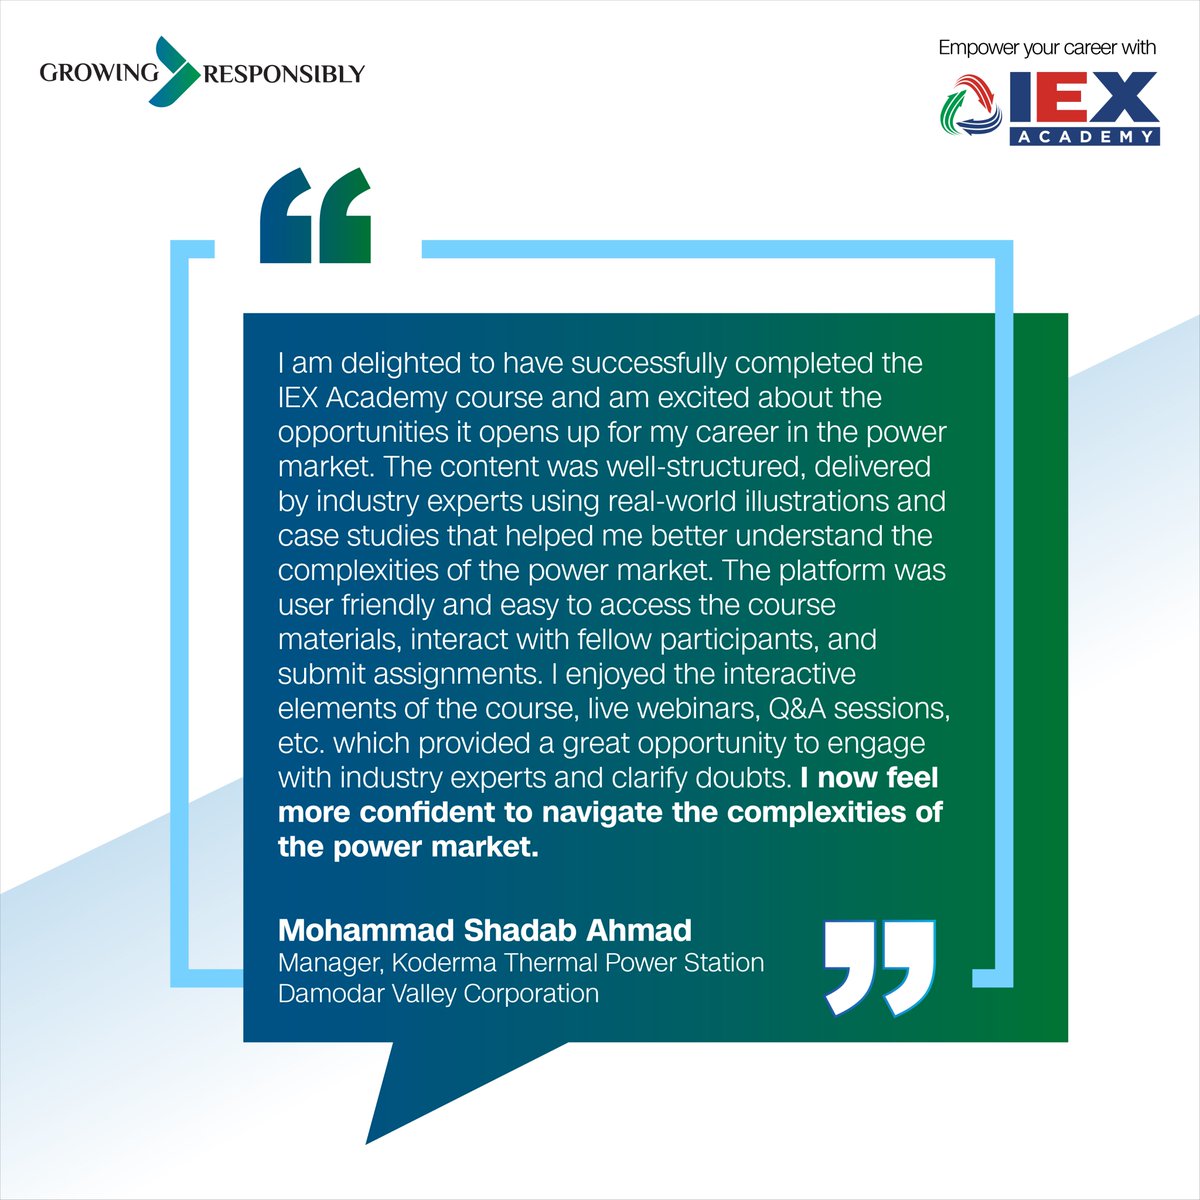 'Delighted to have completed the IEX Academy course! I now feel more confident and equipped to excel in the power market.” - Mohammad Shadab Ahmad, Manager of Koderma Thermal Power Station. #IEXAcademySuccess  #IEXAcademy #Career #PowerExchange #PowerTrading #PowerLeaders…